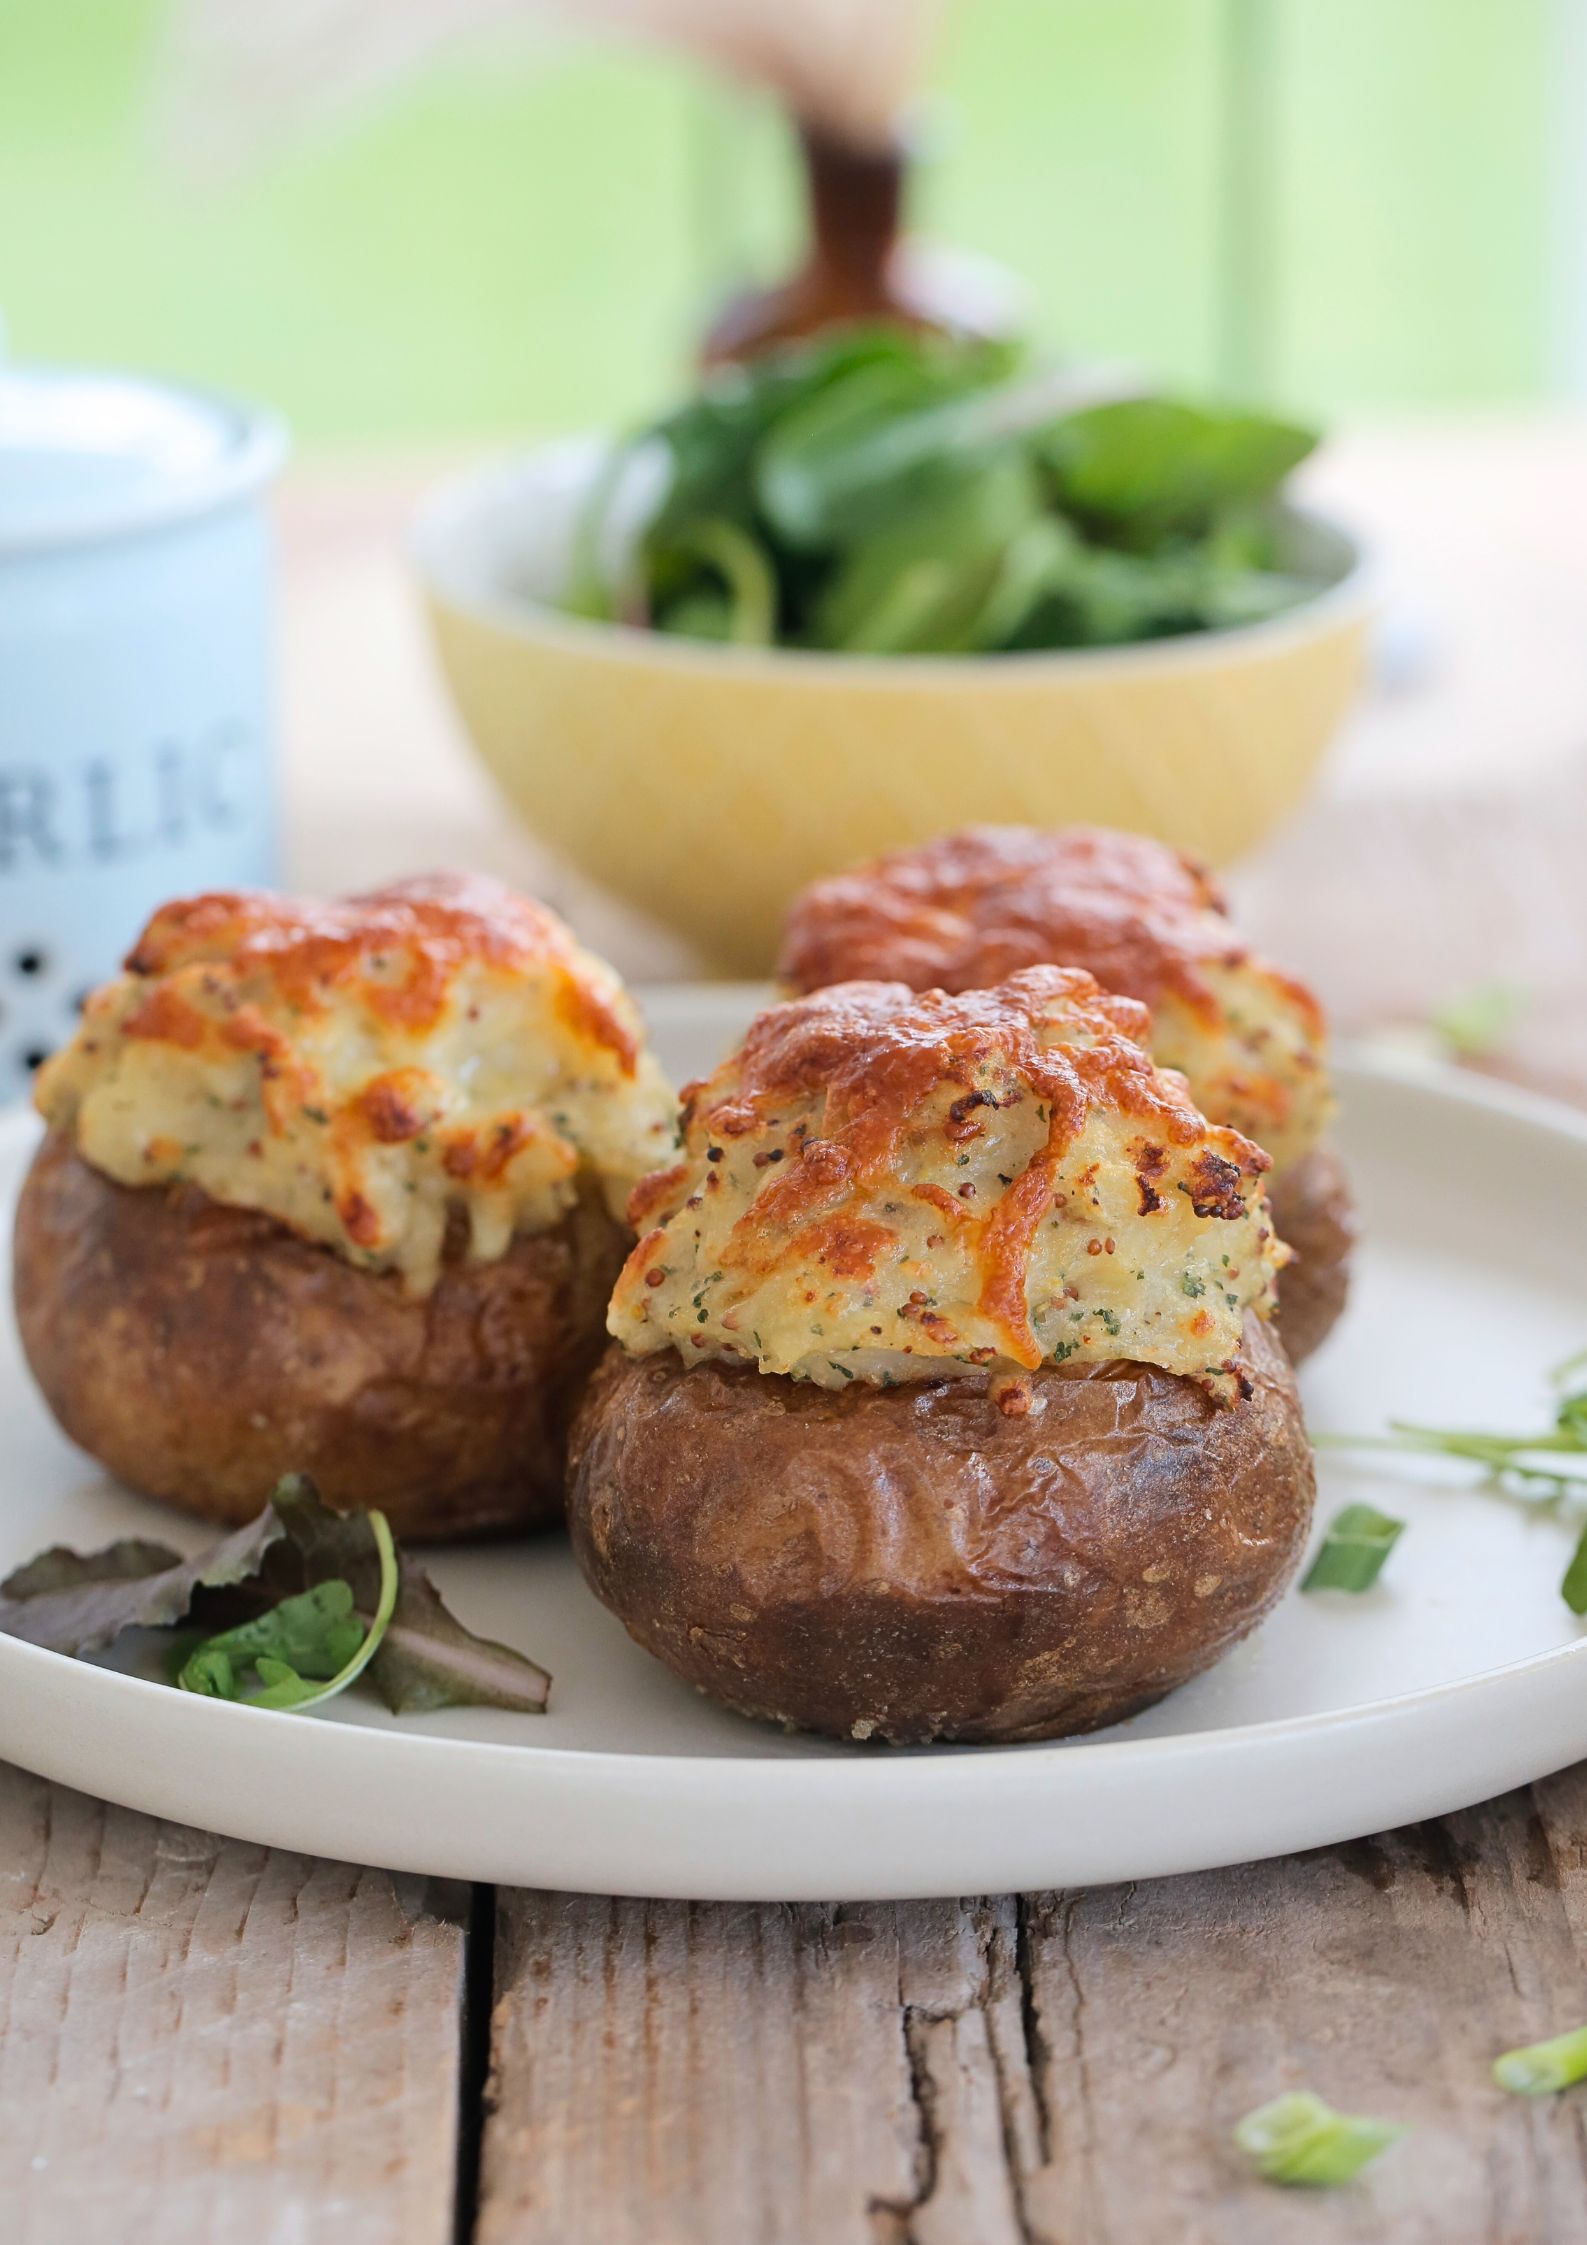 Vegan shepherds pie twice baked potatoes combines two great comfort foods for a make ahead lunch or hearty dinner when paired with extra veggies! #ovenbakedpotatoes #potatorecipes #twicebakedpotatoes #veganshepherdspie